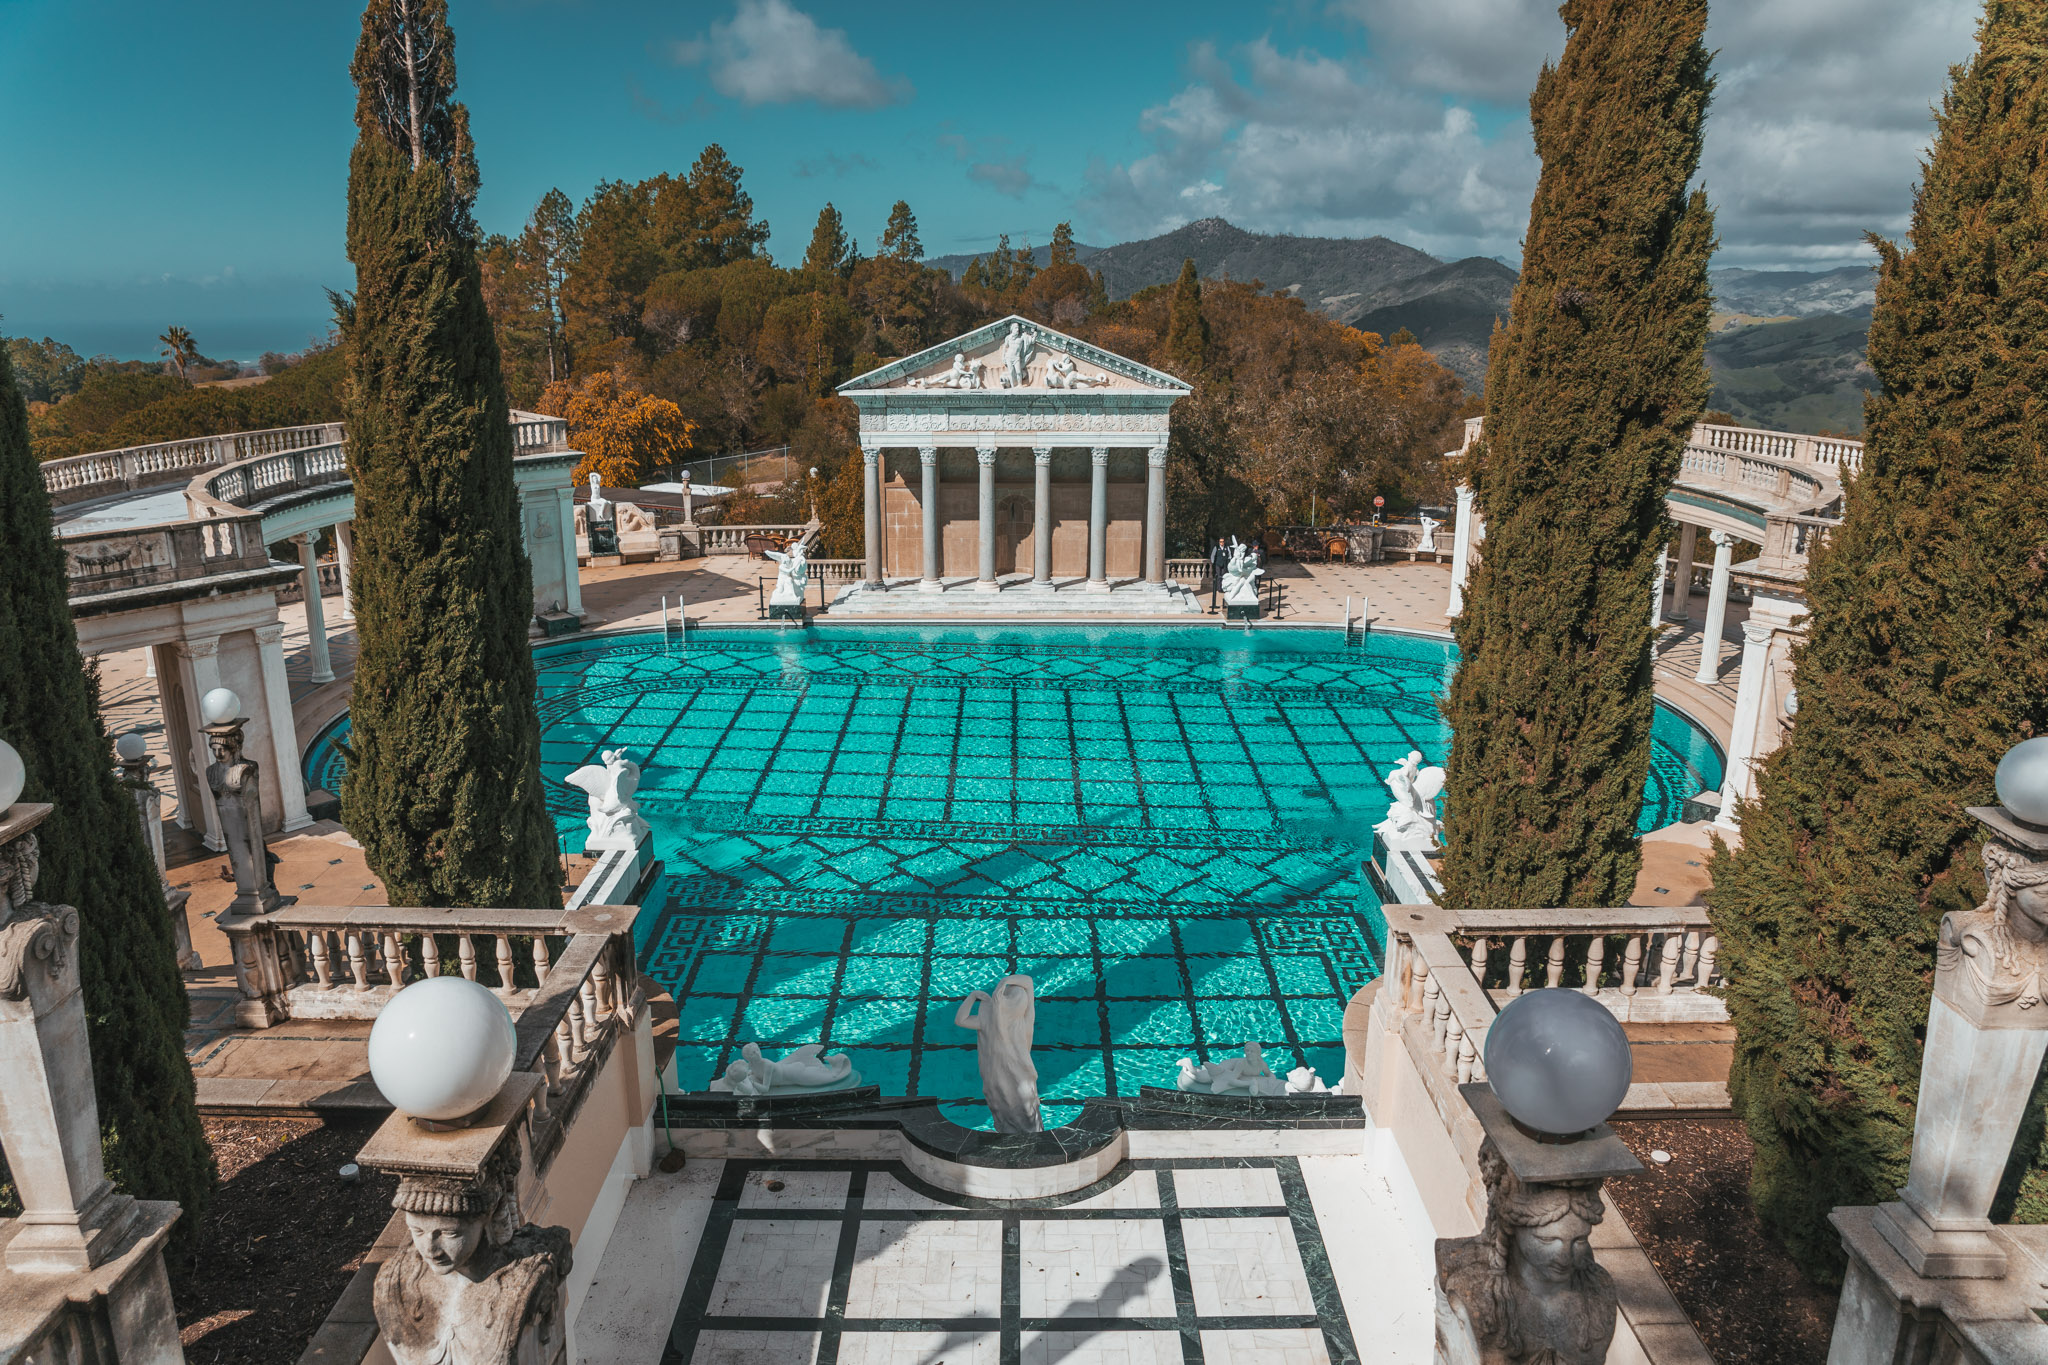 Hearst Castle outdoor pool ~ The Most Instagrammable Spots in SLO CAL County ~ #readysetjetset #slocal #california #blogpost #travel #sanluisobispo